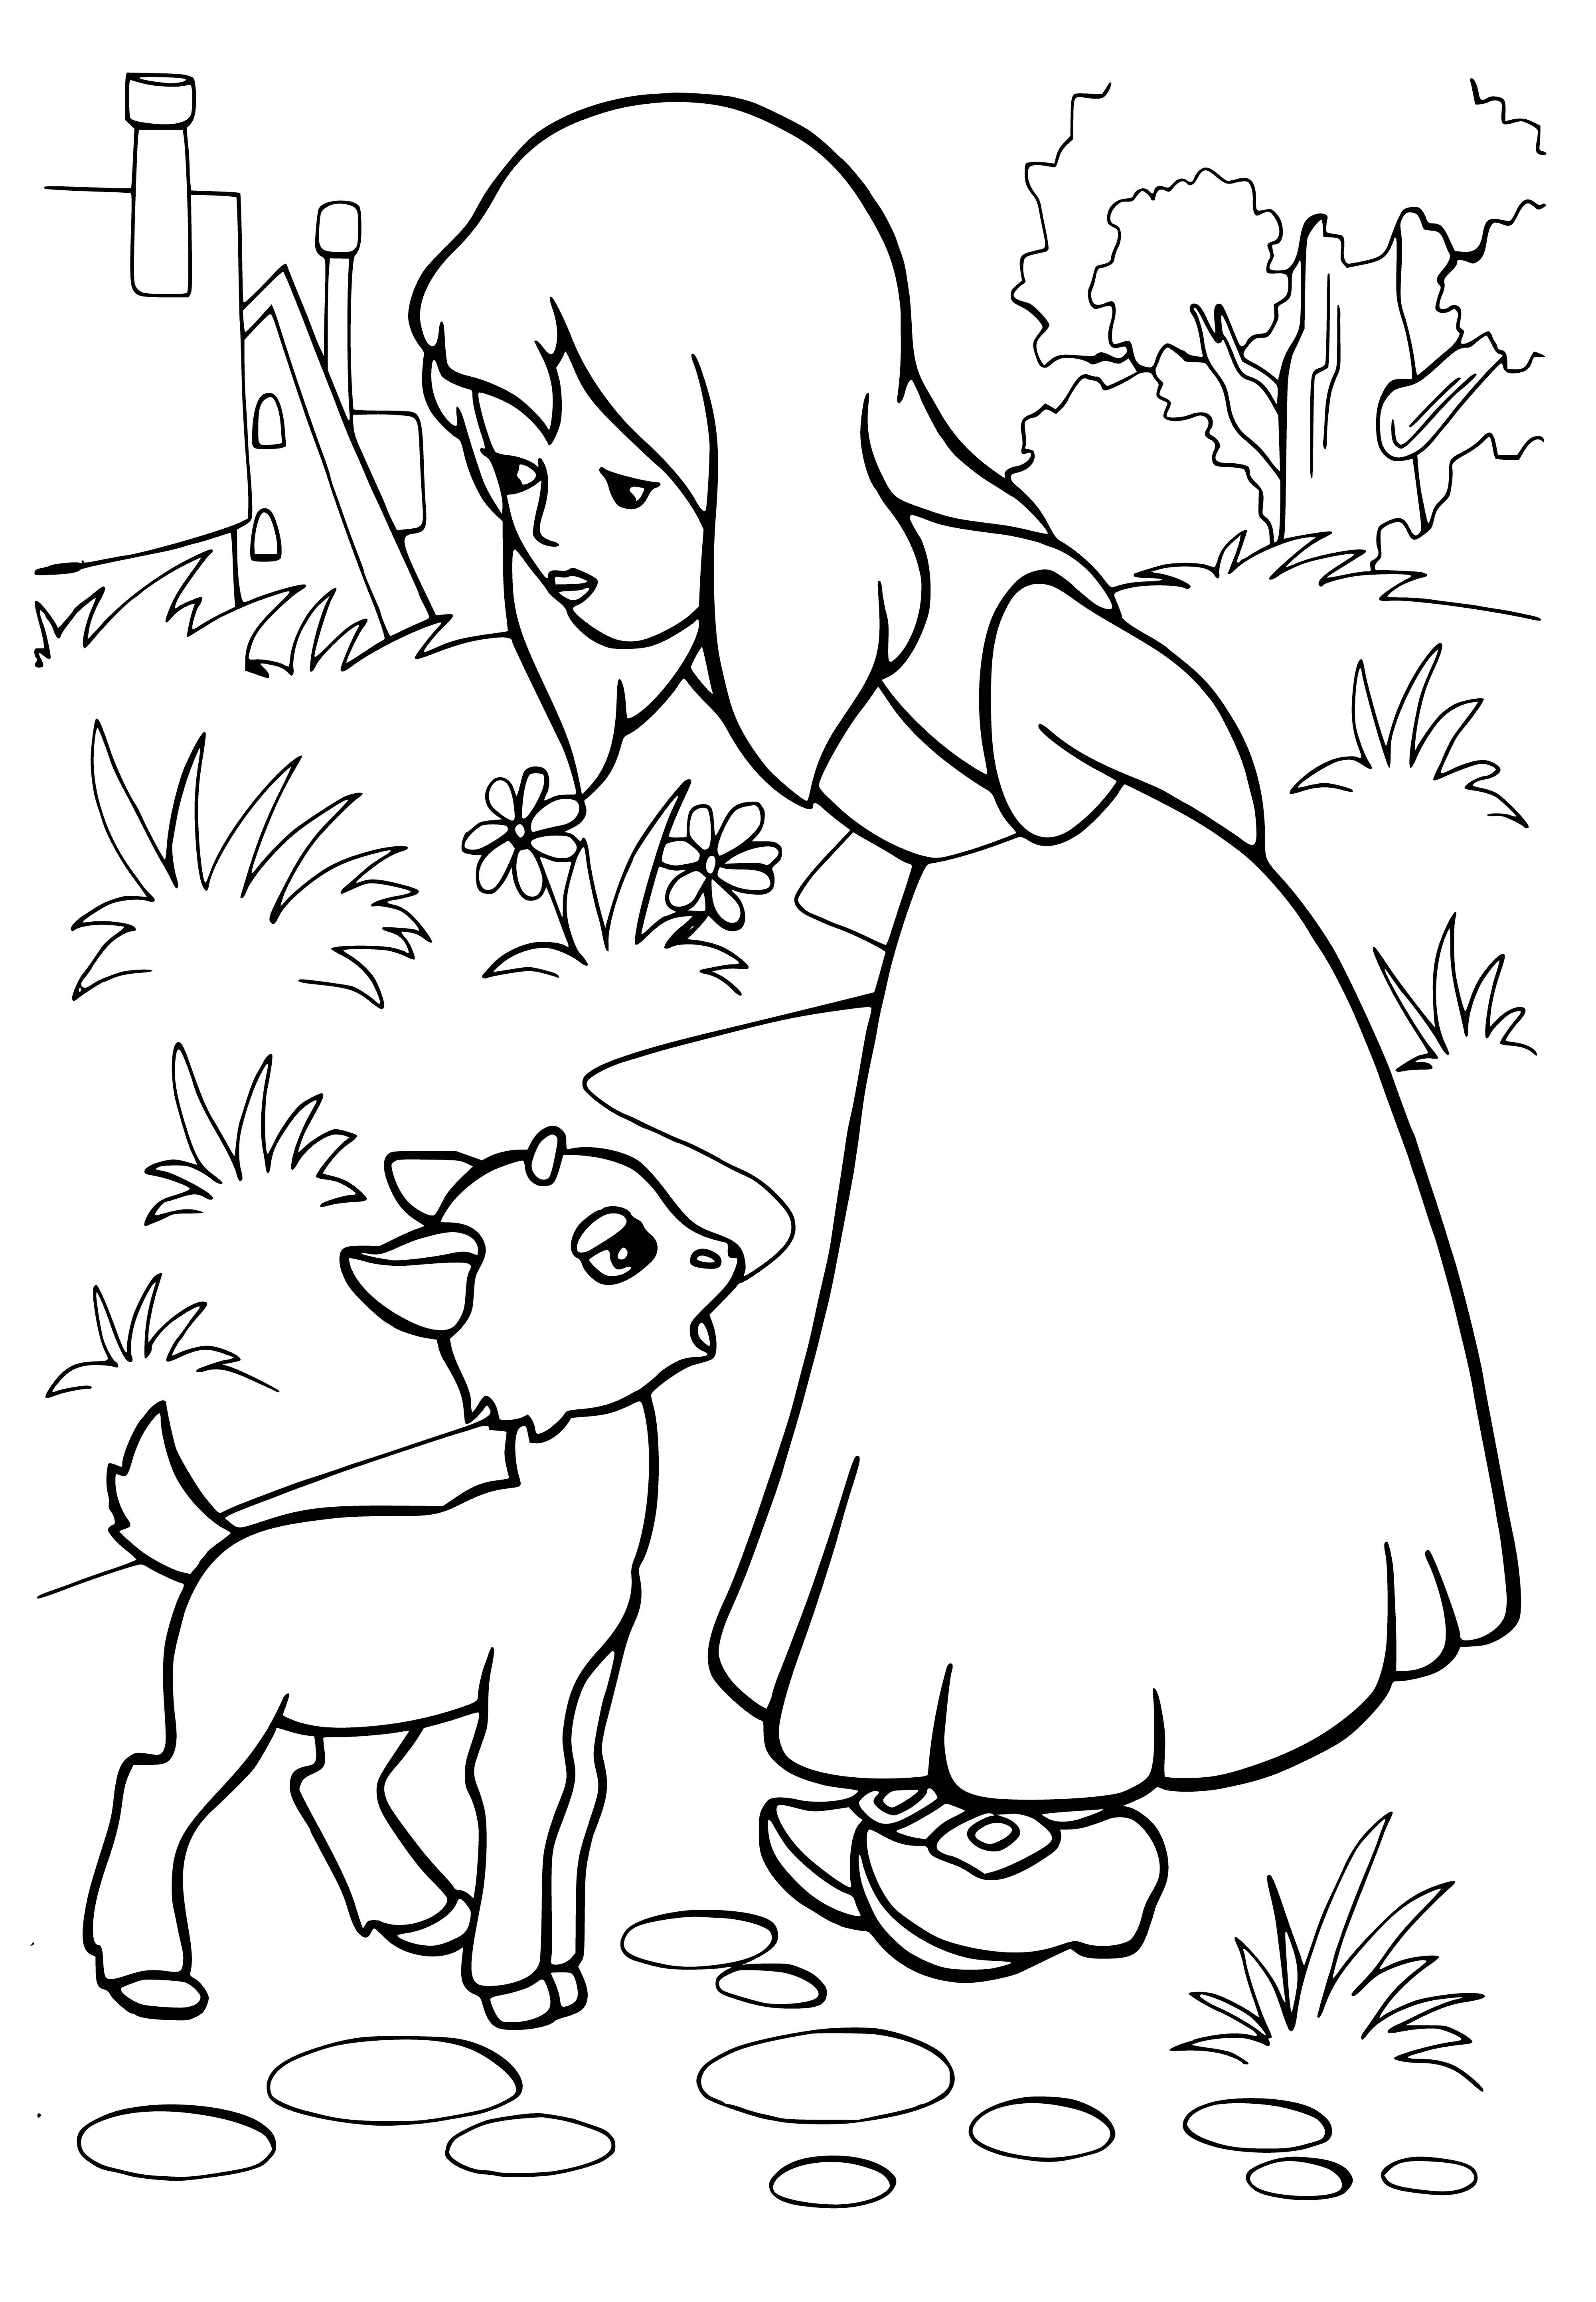 coloring page: Young girl in light blue dress and red scarf stands in snow, gazing up at snowflake-filled sky.